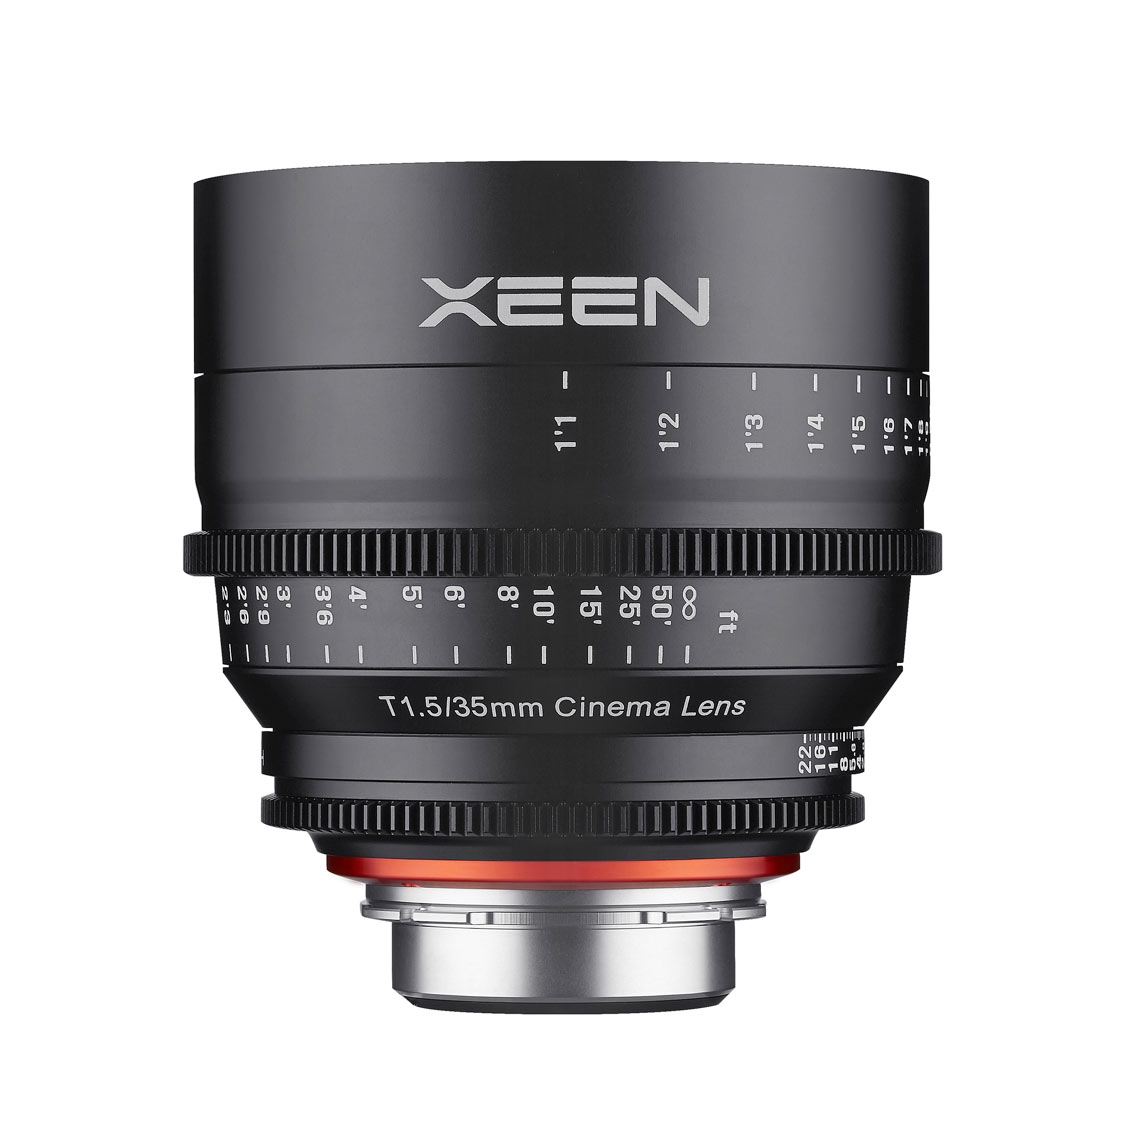 Rokinon 35mm T1.5 Xeen Professional Cine Lens for Canon EF Mount